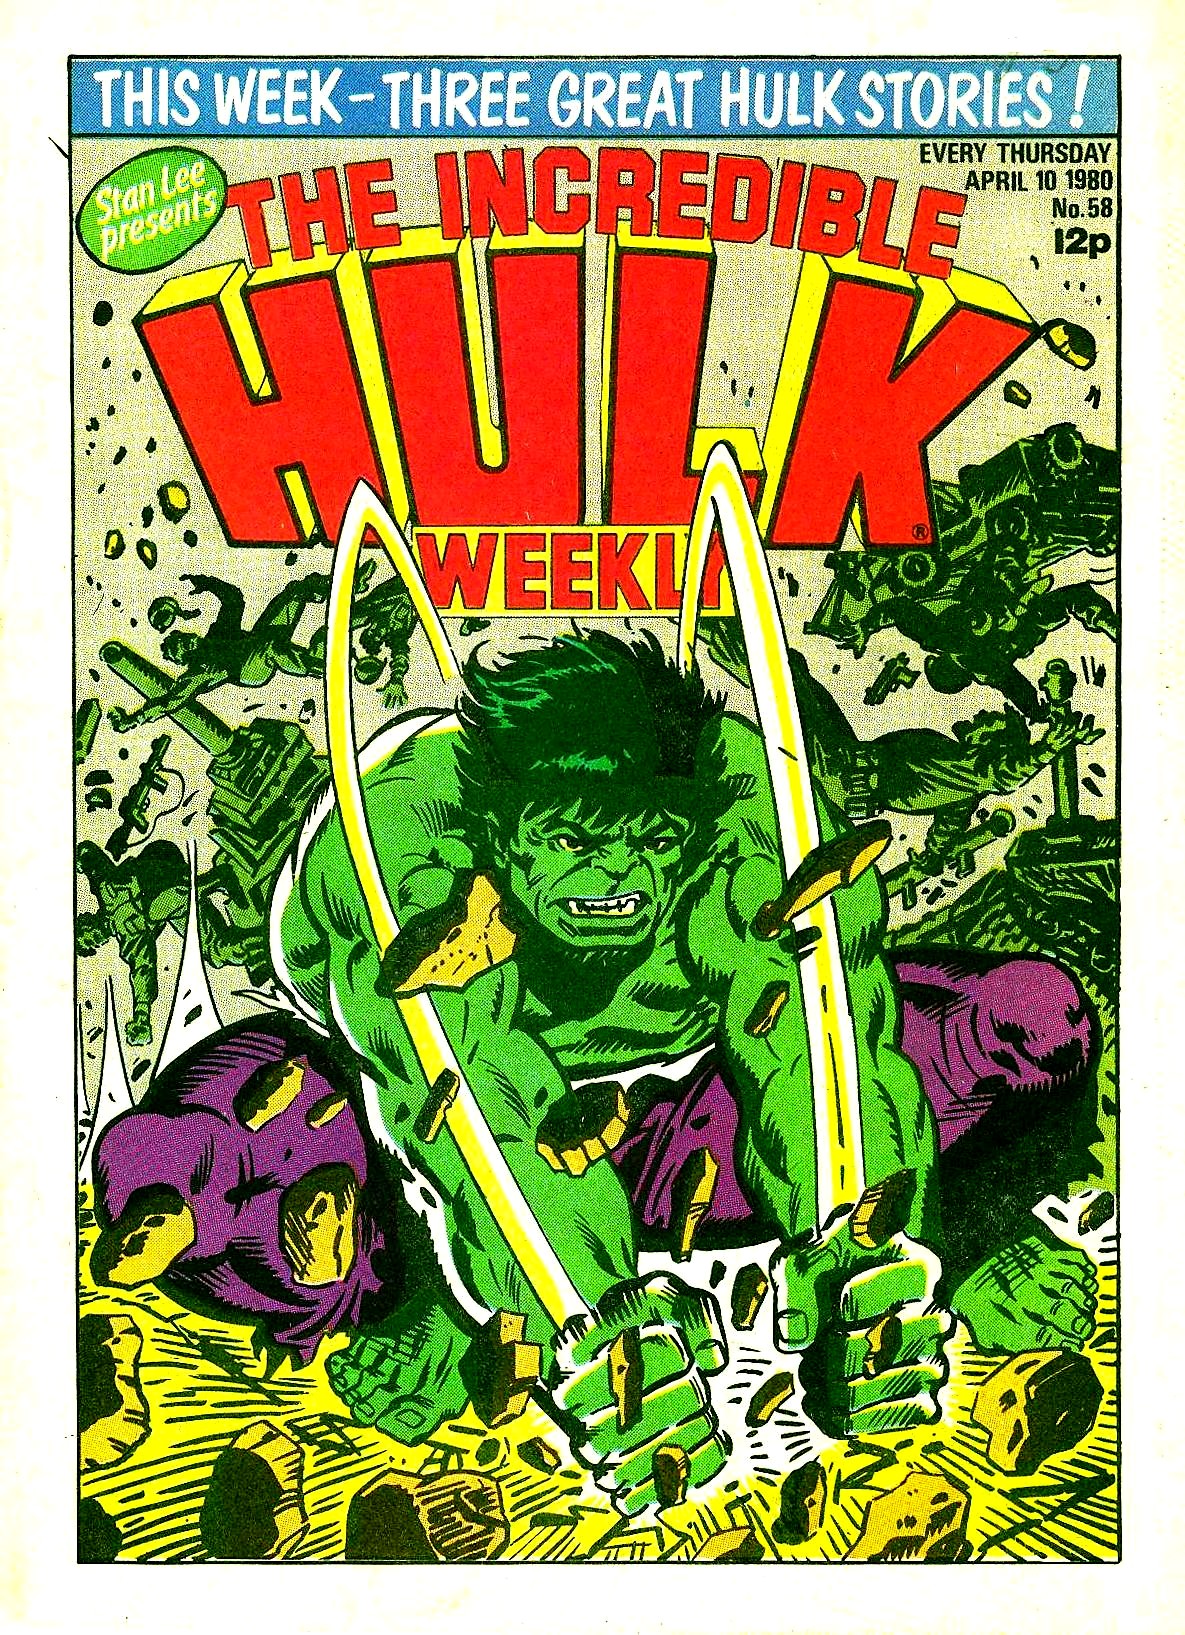 Read online The Incredible Hulk Weekly comic -  Issue #58 - 1